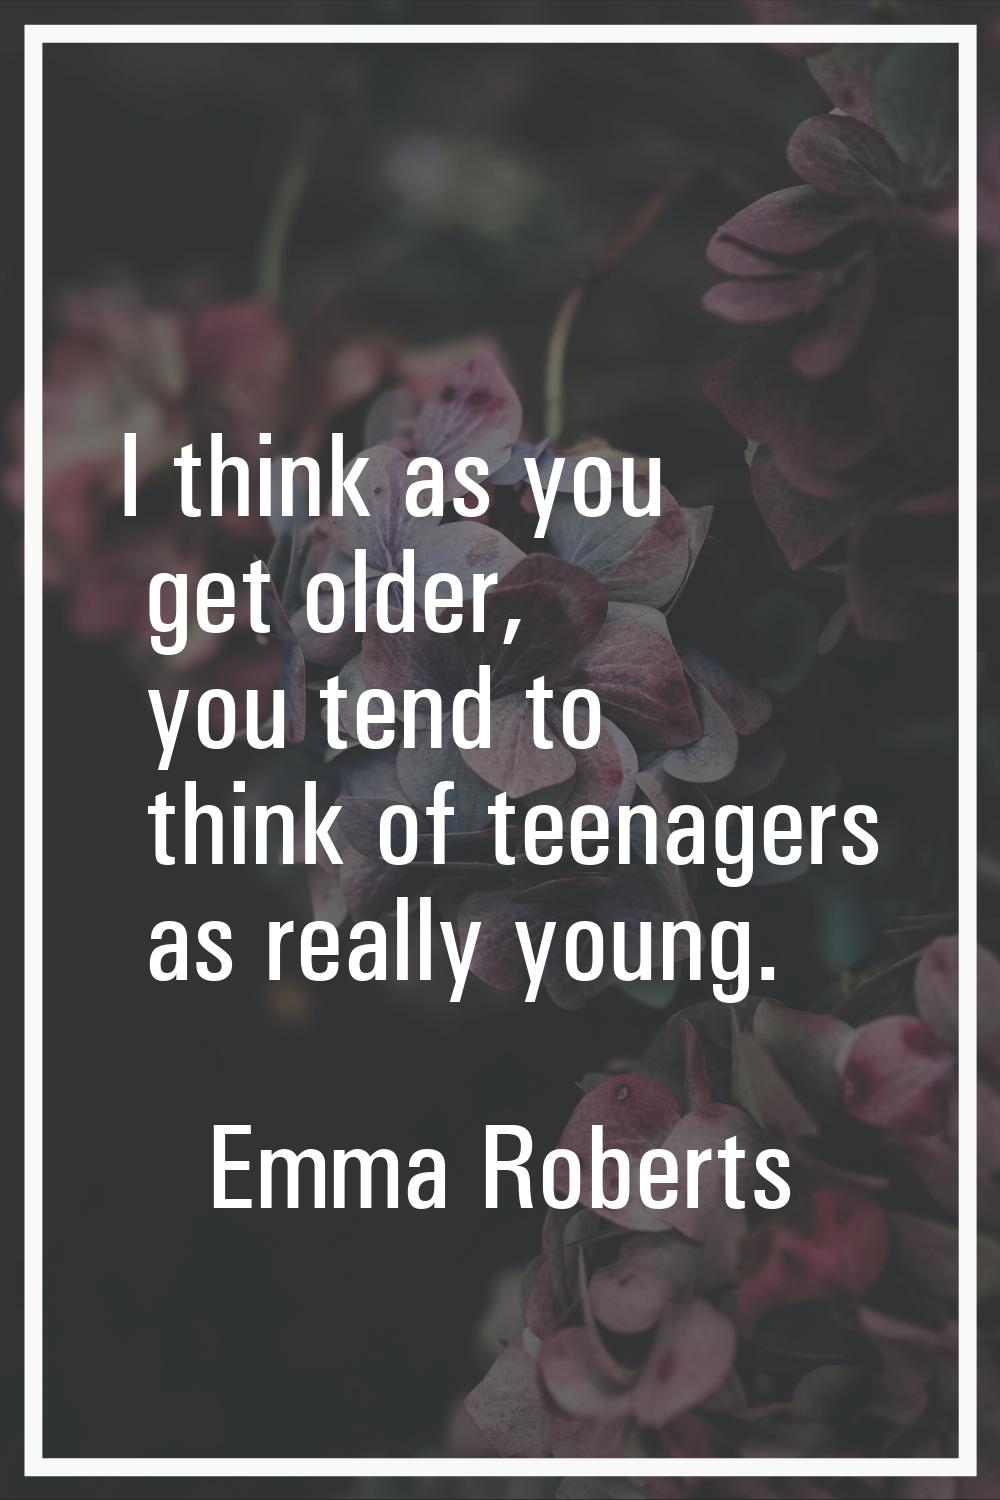 I think as you get older, you tend to think of teenagers as really young.